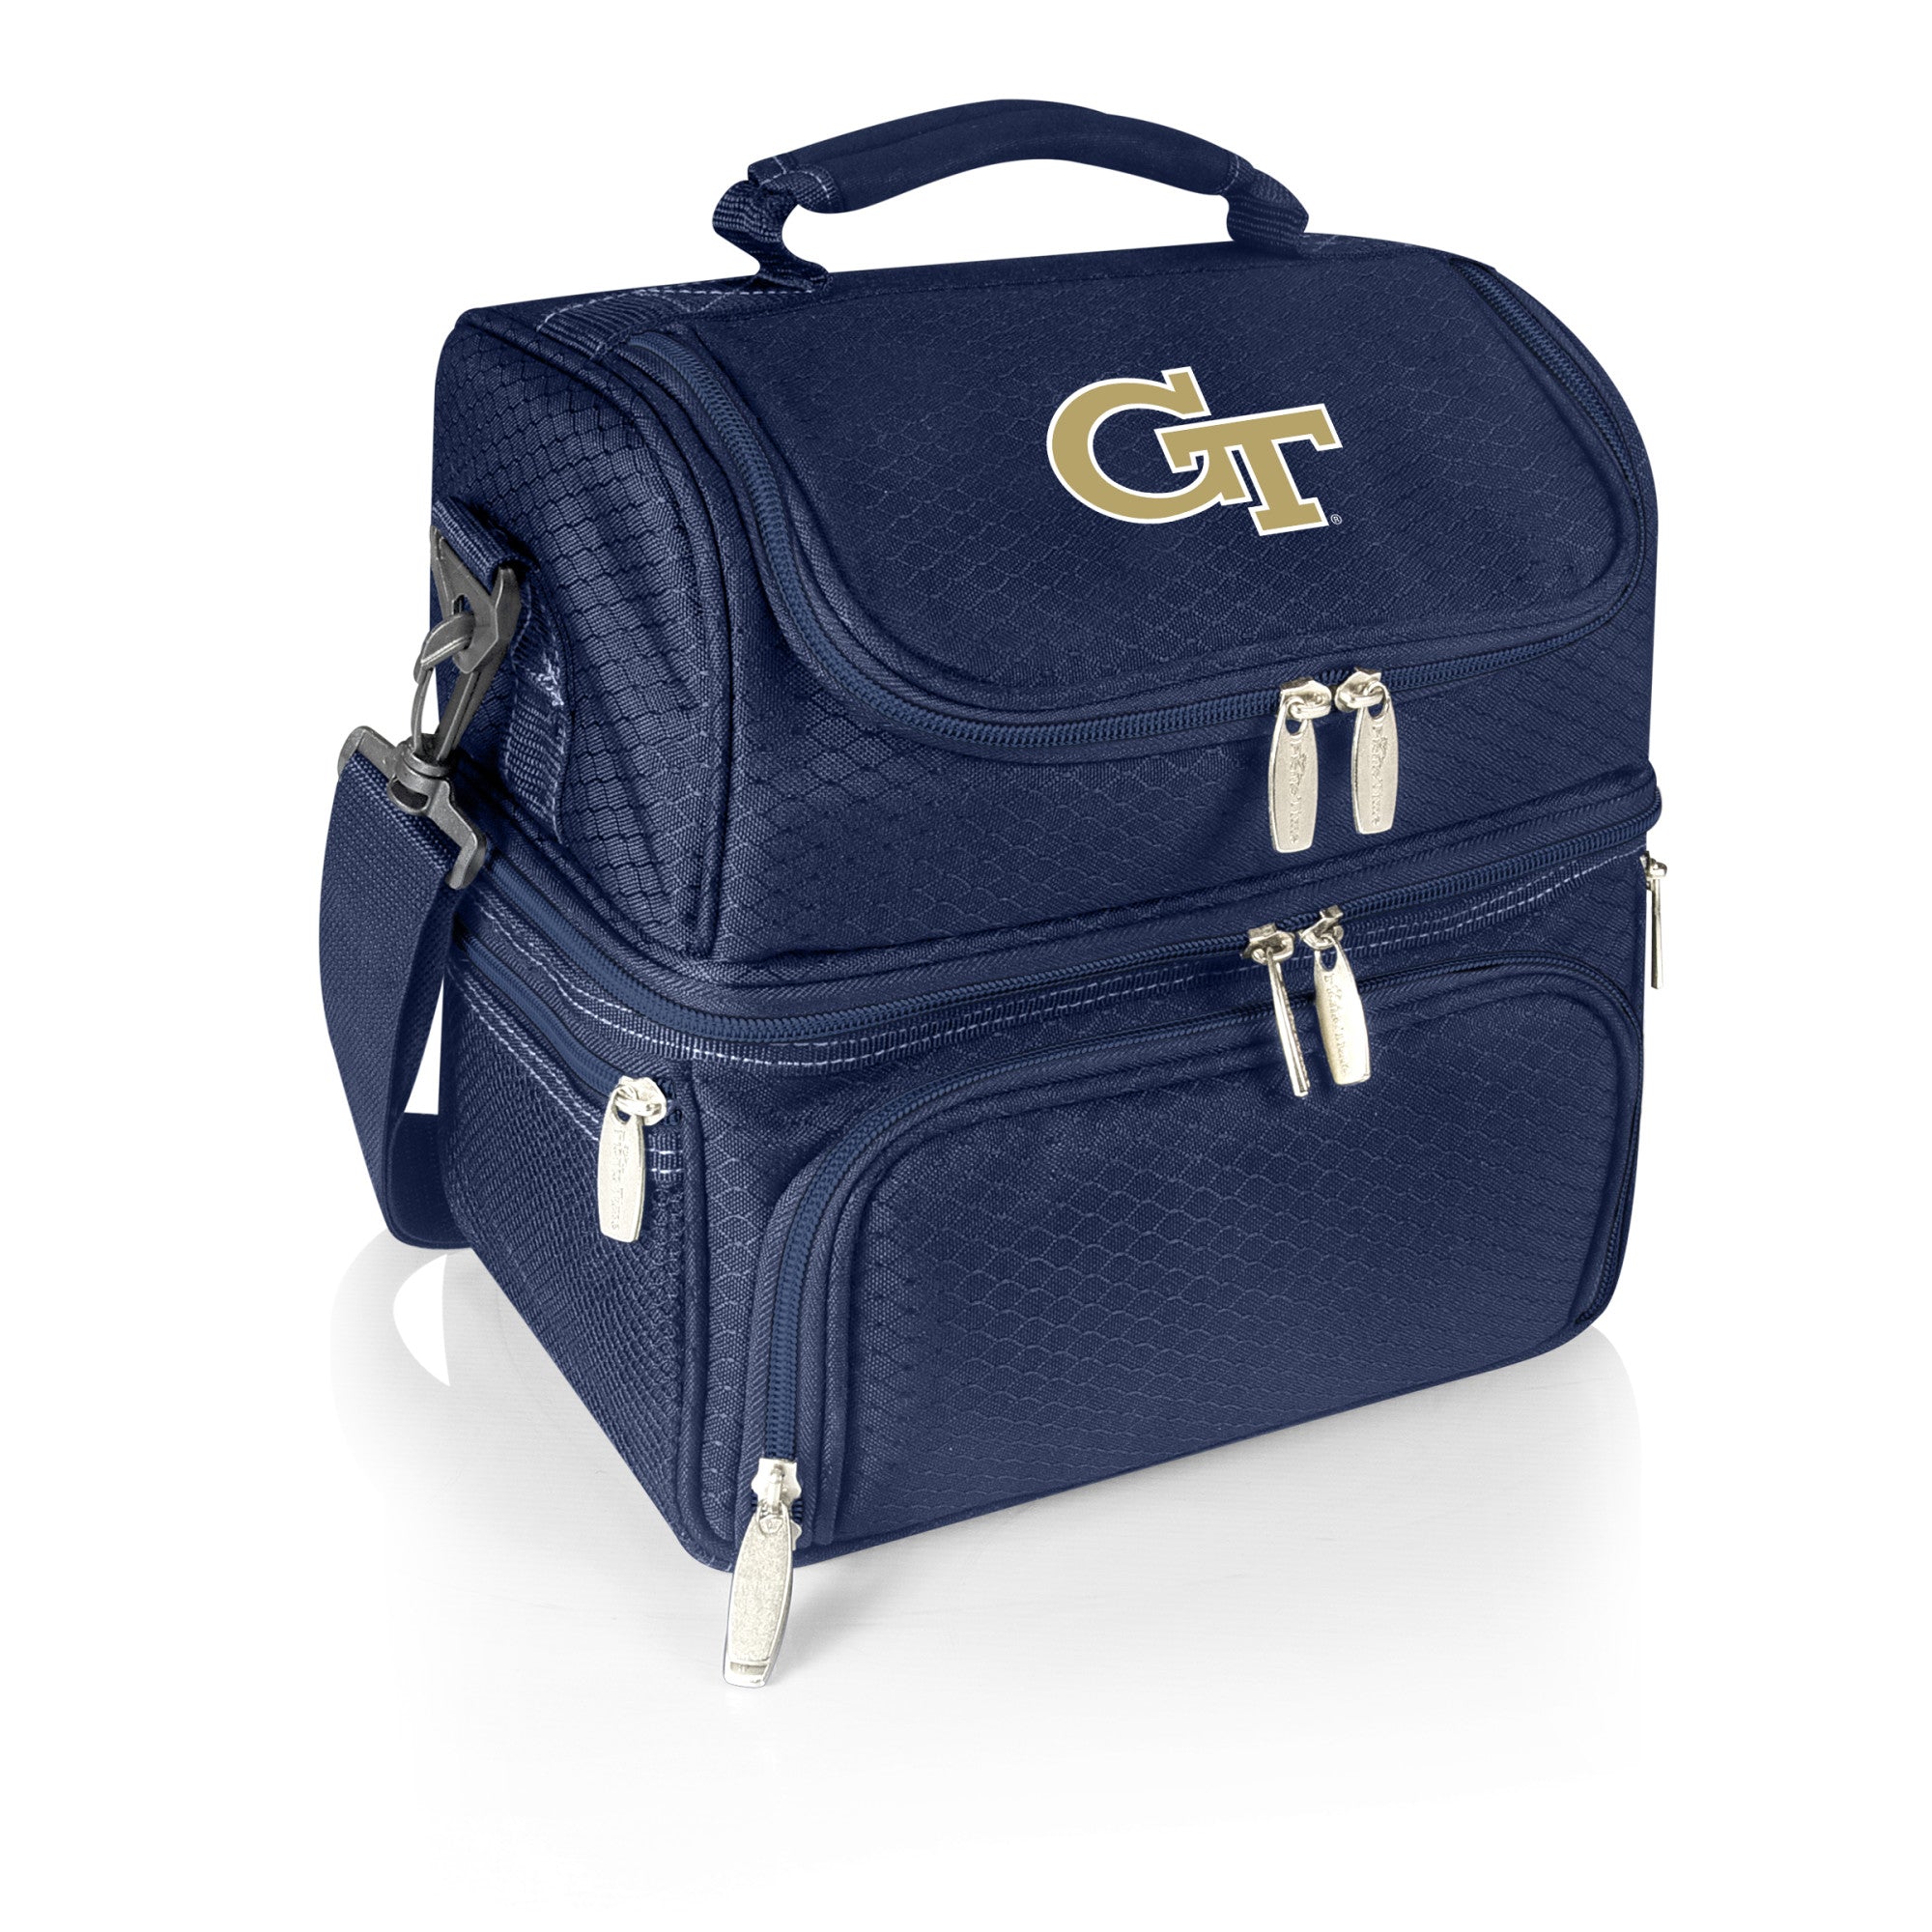 Georgia Tech Yellow Jackets - Pranzo Lunch Bag Cooler with Utensils